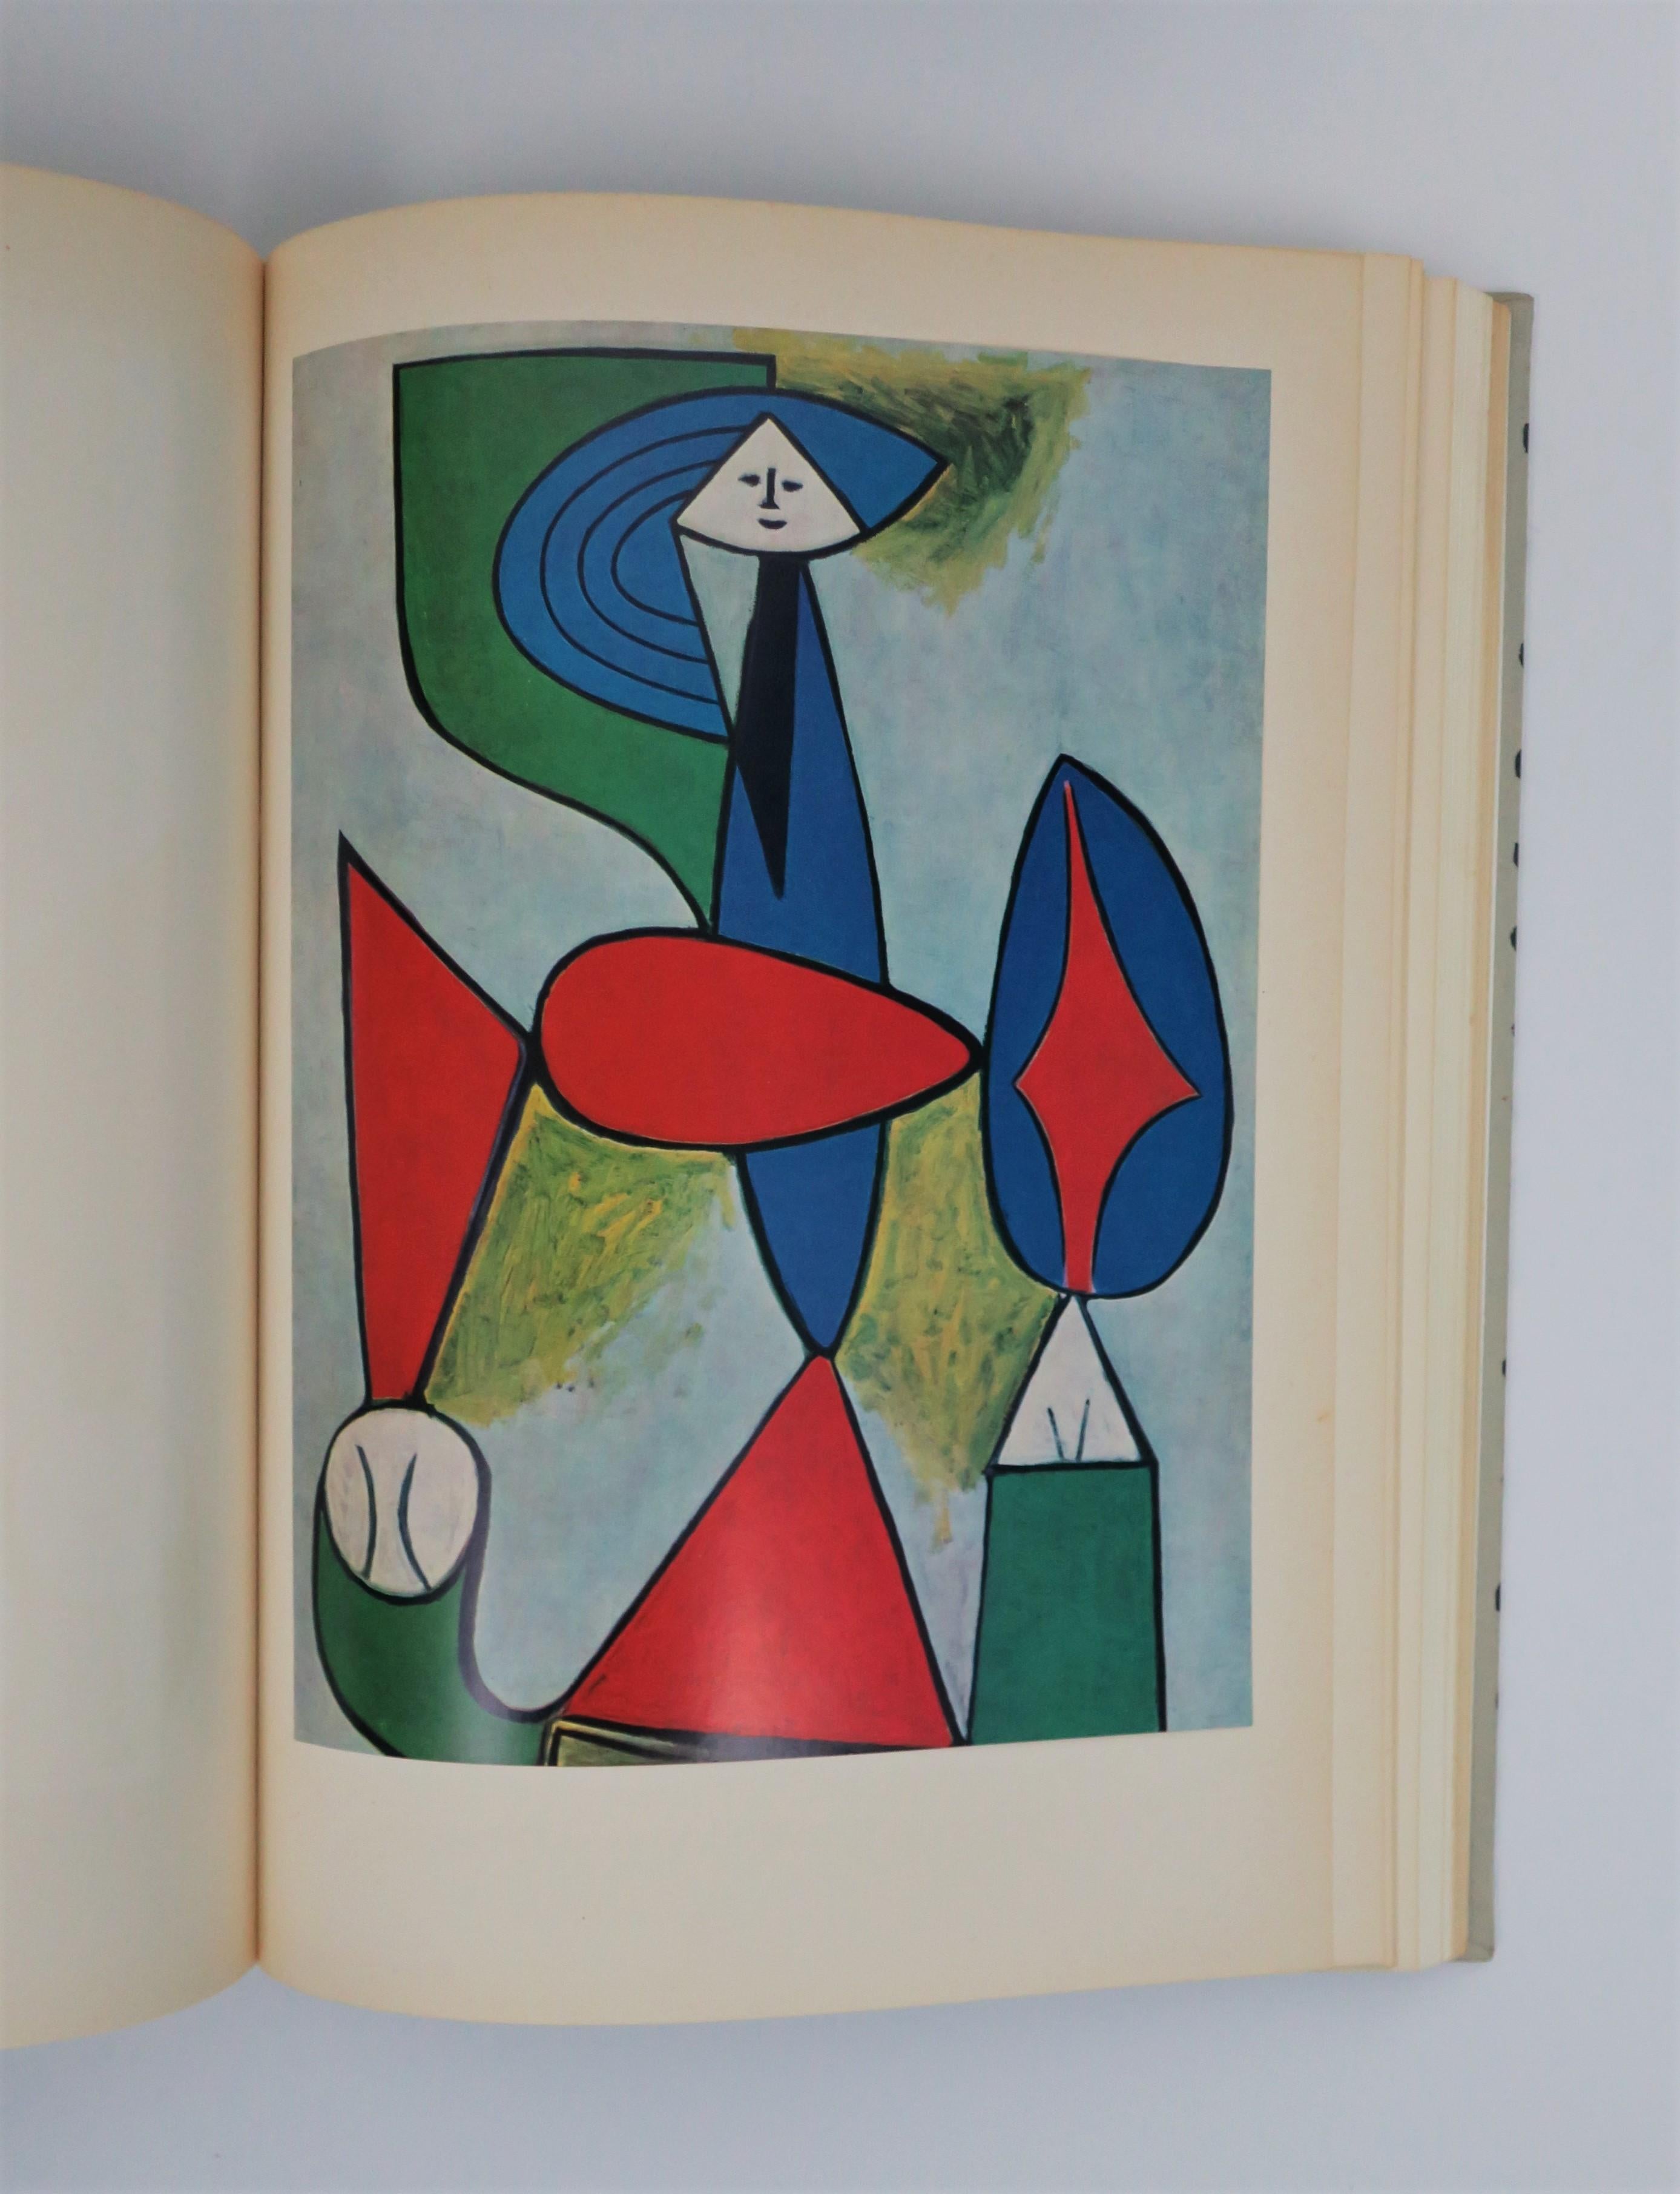 Picasso, Library or Coffee Table Book, circa 1950s For Sale 3